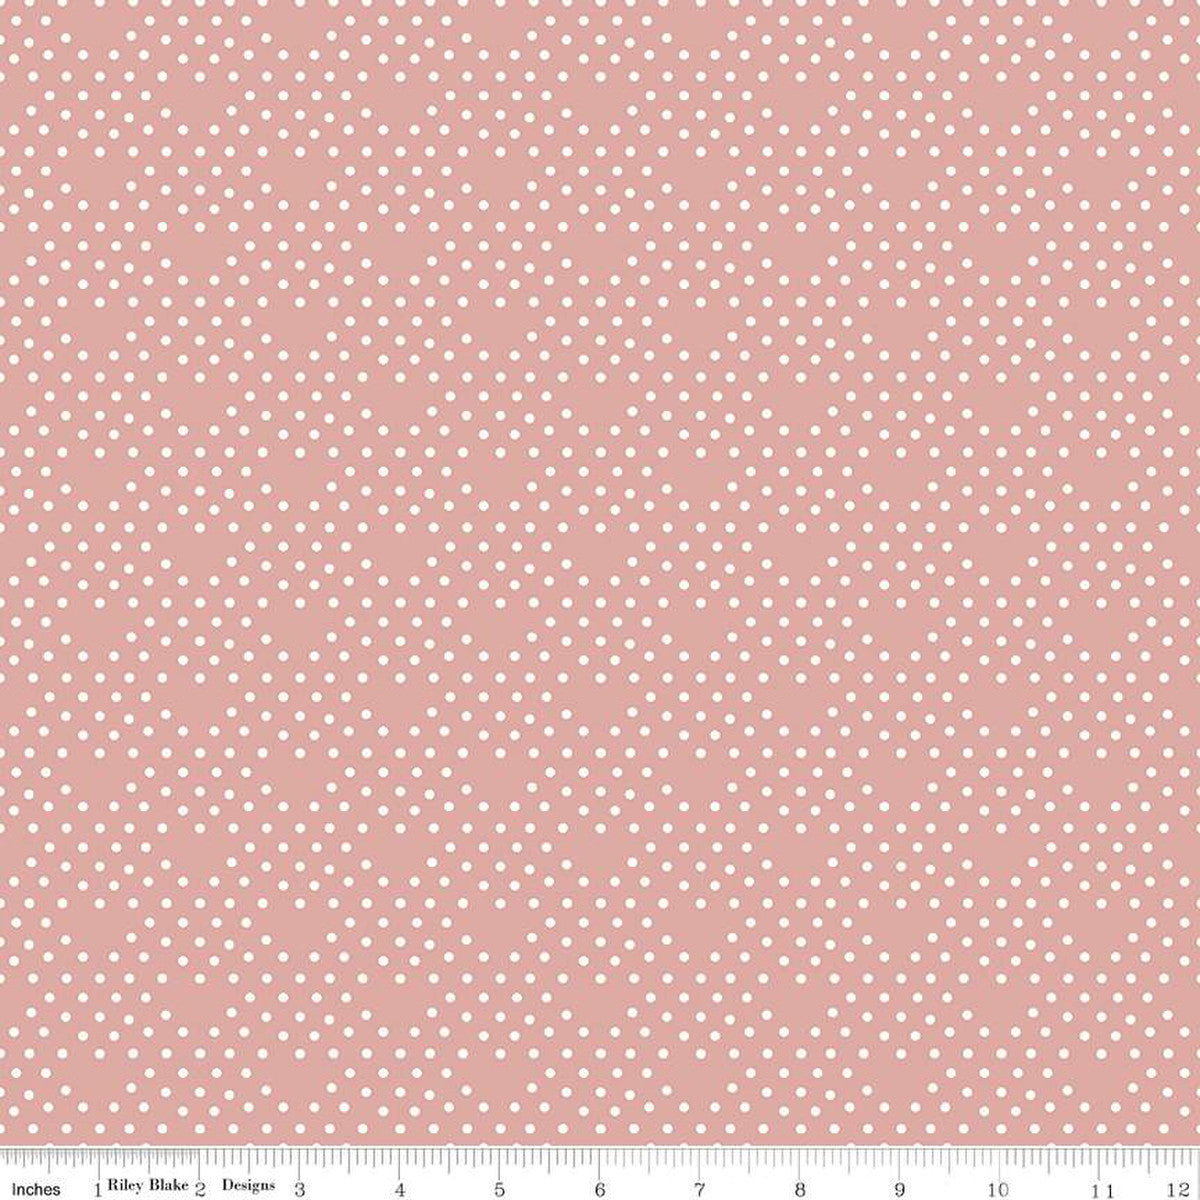 BloomBerry Dots Dusty Rose